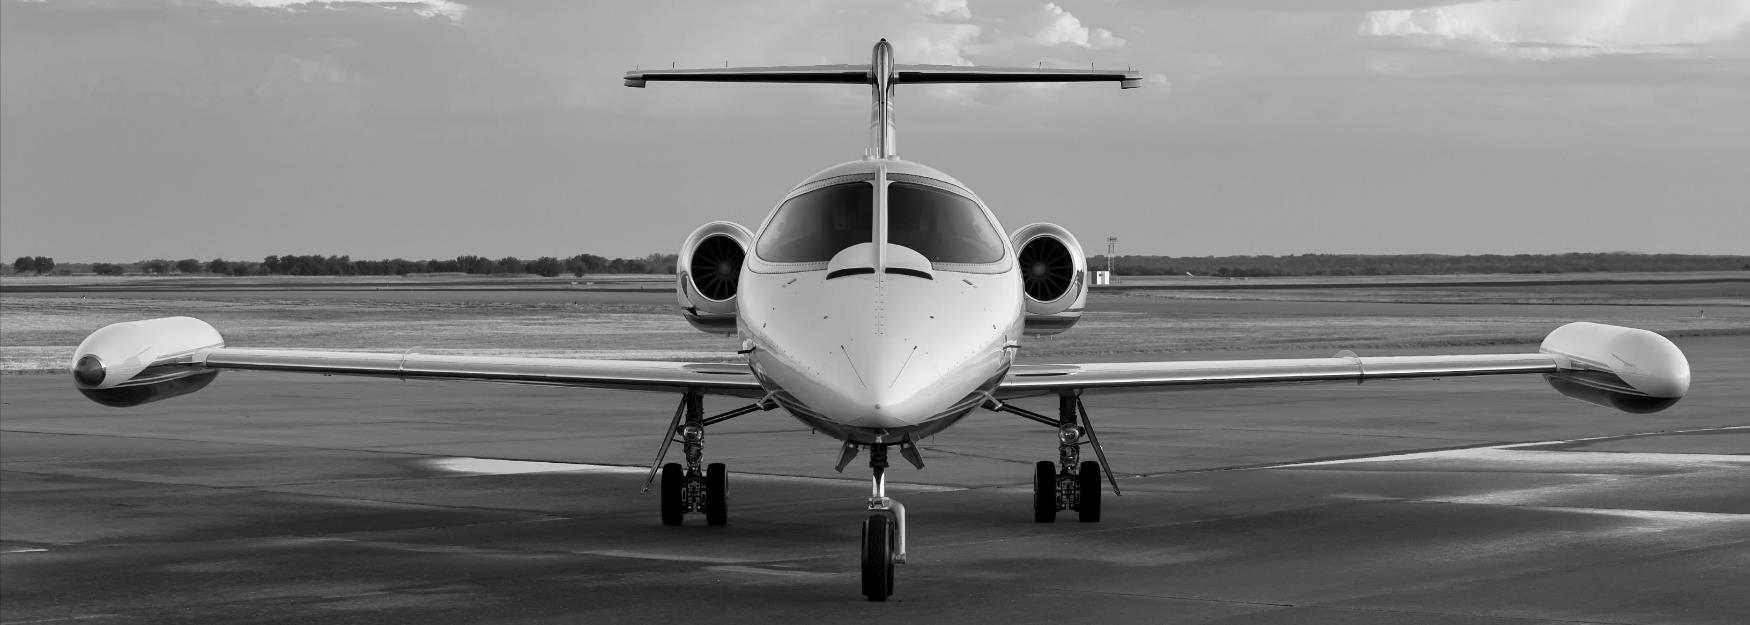 Private business jet at Gloucestershire Airport, Cheltenham